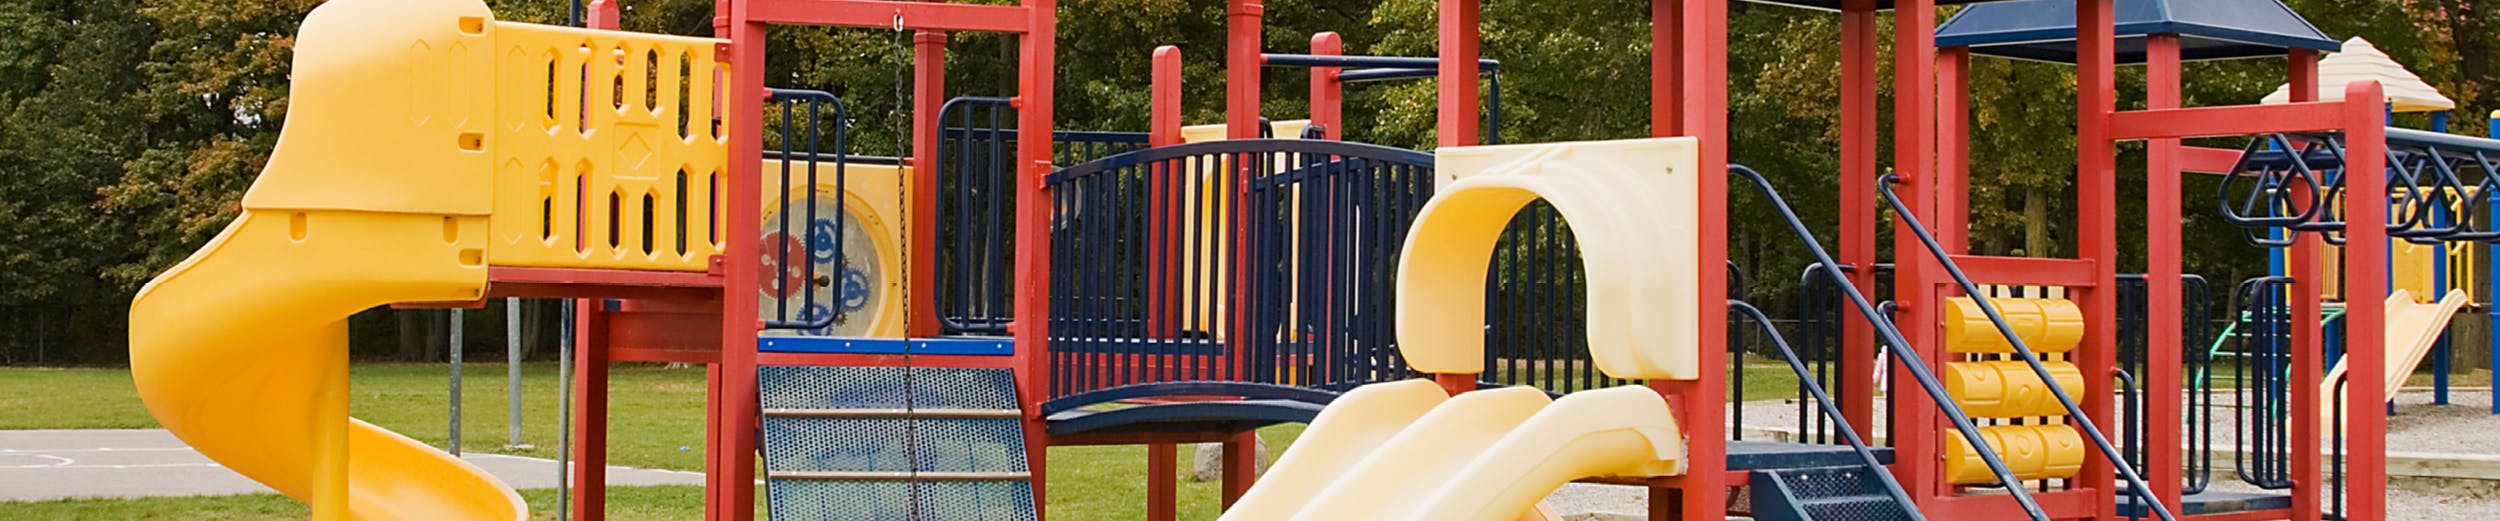 Playground with slides, covered structures and interactive features.